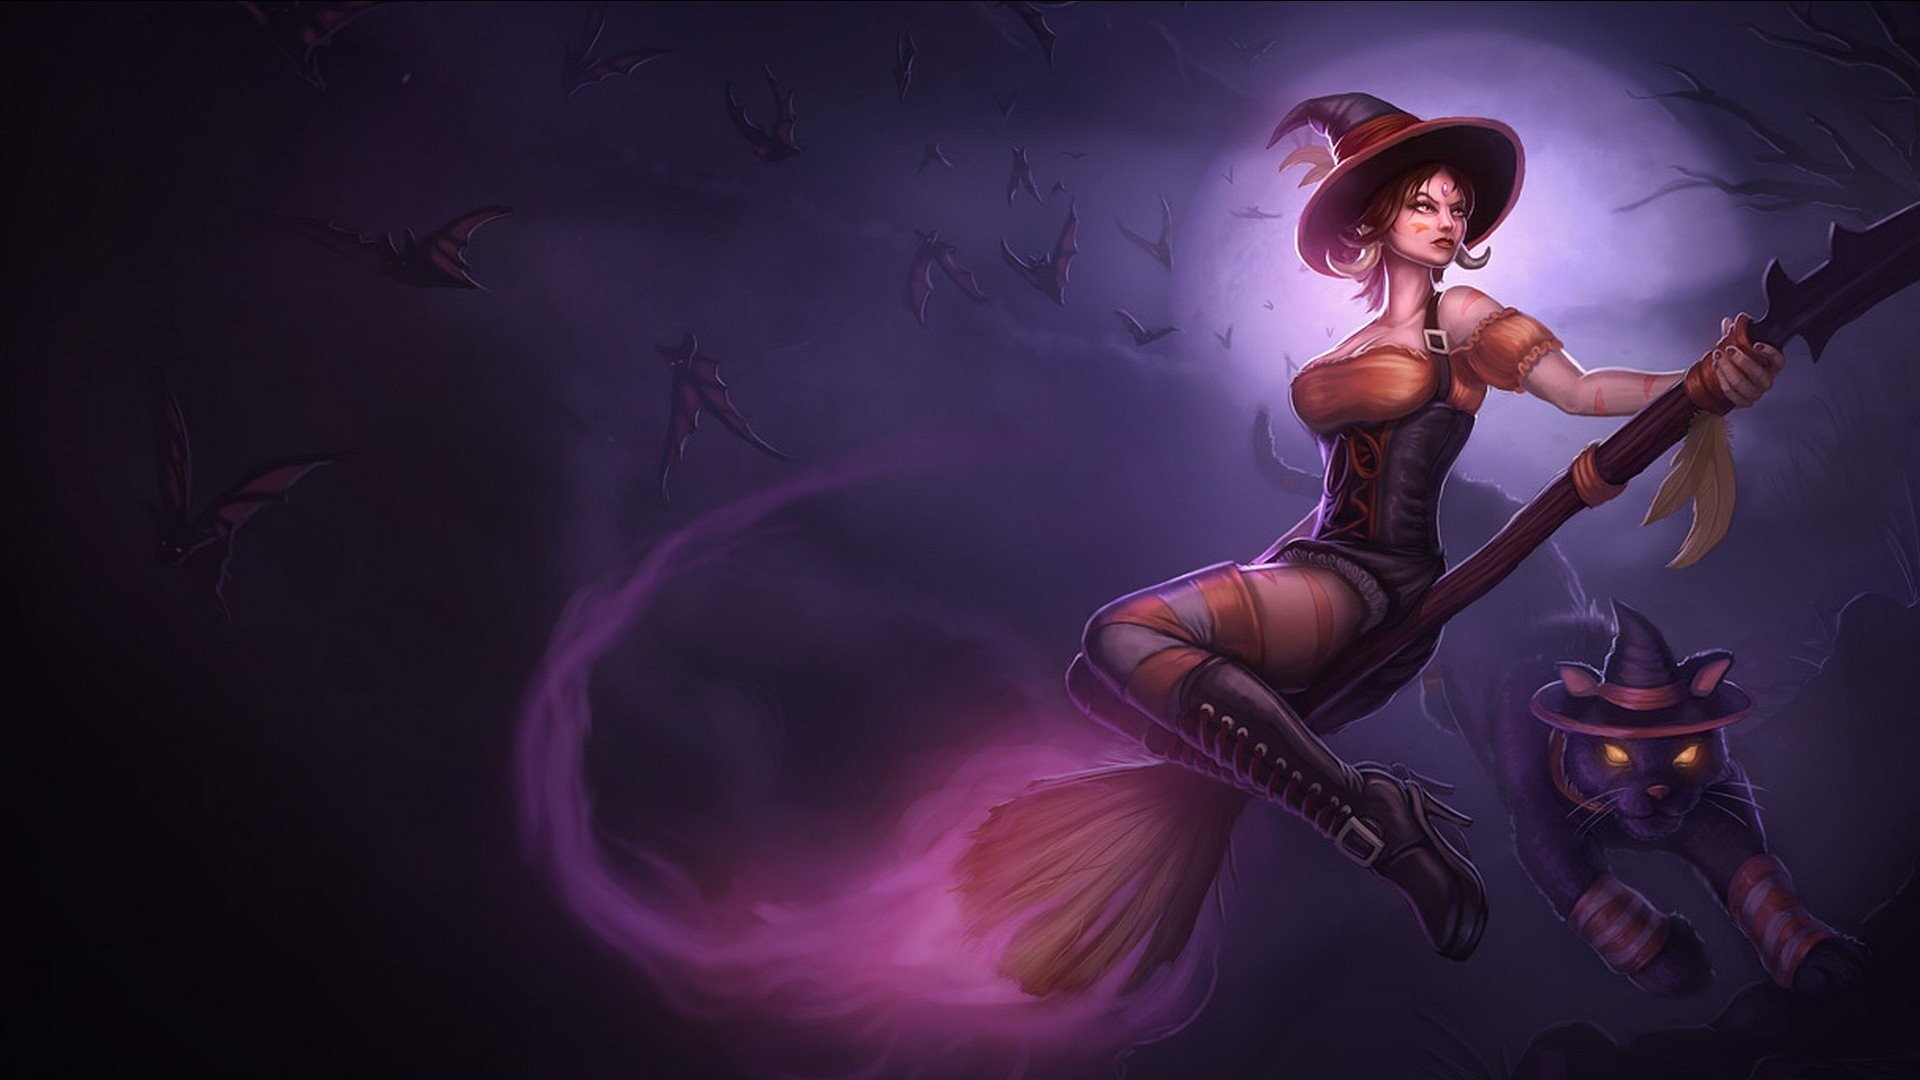 General 1920x1080 fantasy art witch League of Legends video games women witch hat broom sitting video game art fantasy girl video game girls